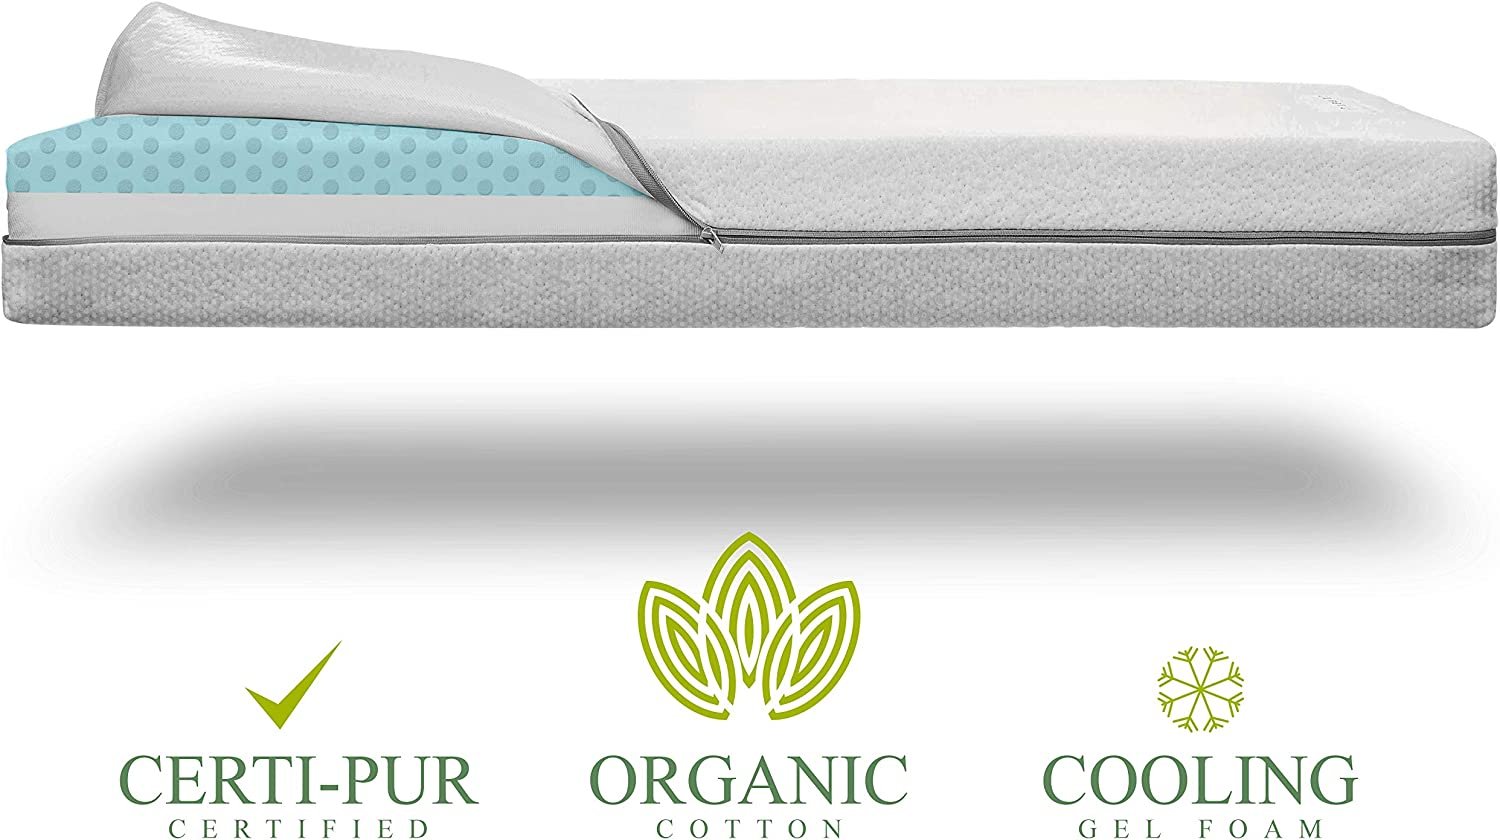 Organic Cotton Dual-Sided Crib Mattress | 2-Stage Premium Memory Foam CertiPUR-US Hypoallergenic Baby Mattress, Firm Support for Infant, Cooling Gel for Toddler, Waterproof & Washable Cover, 52x27x5.5